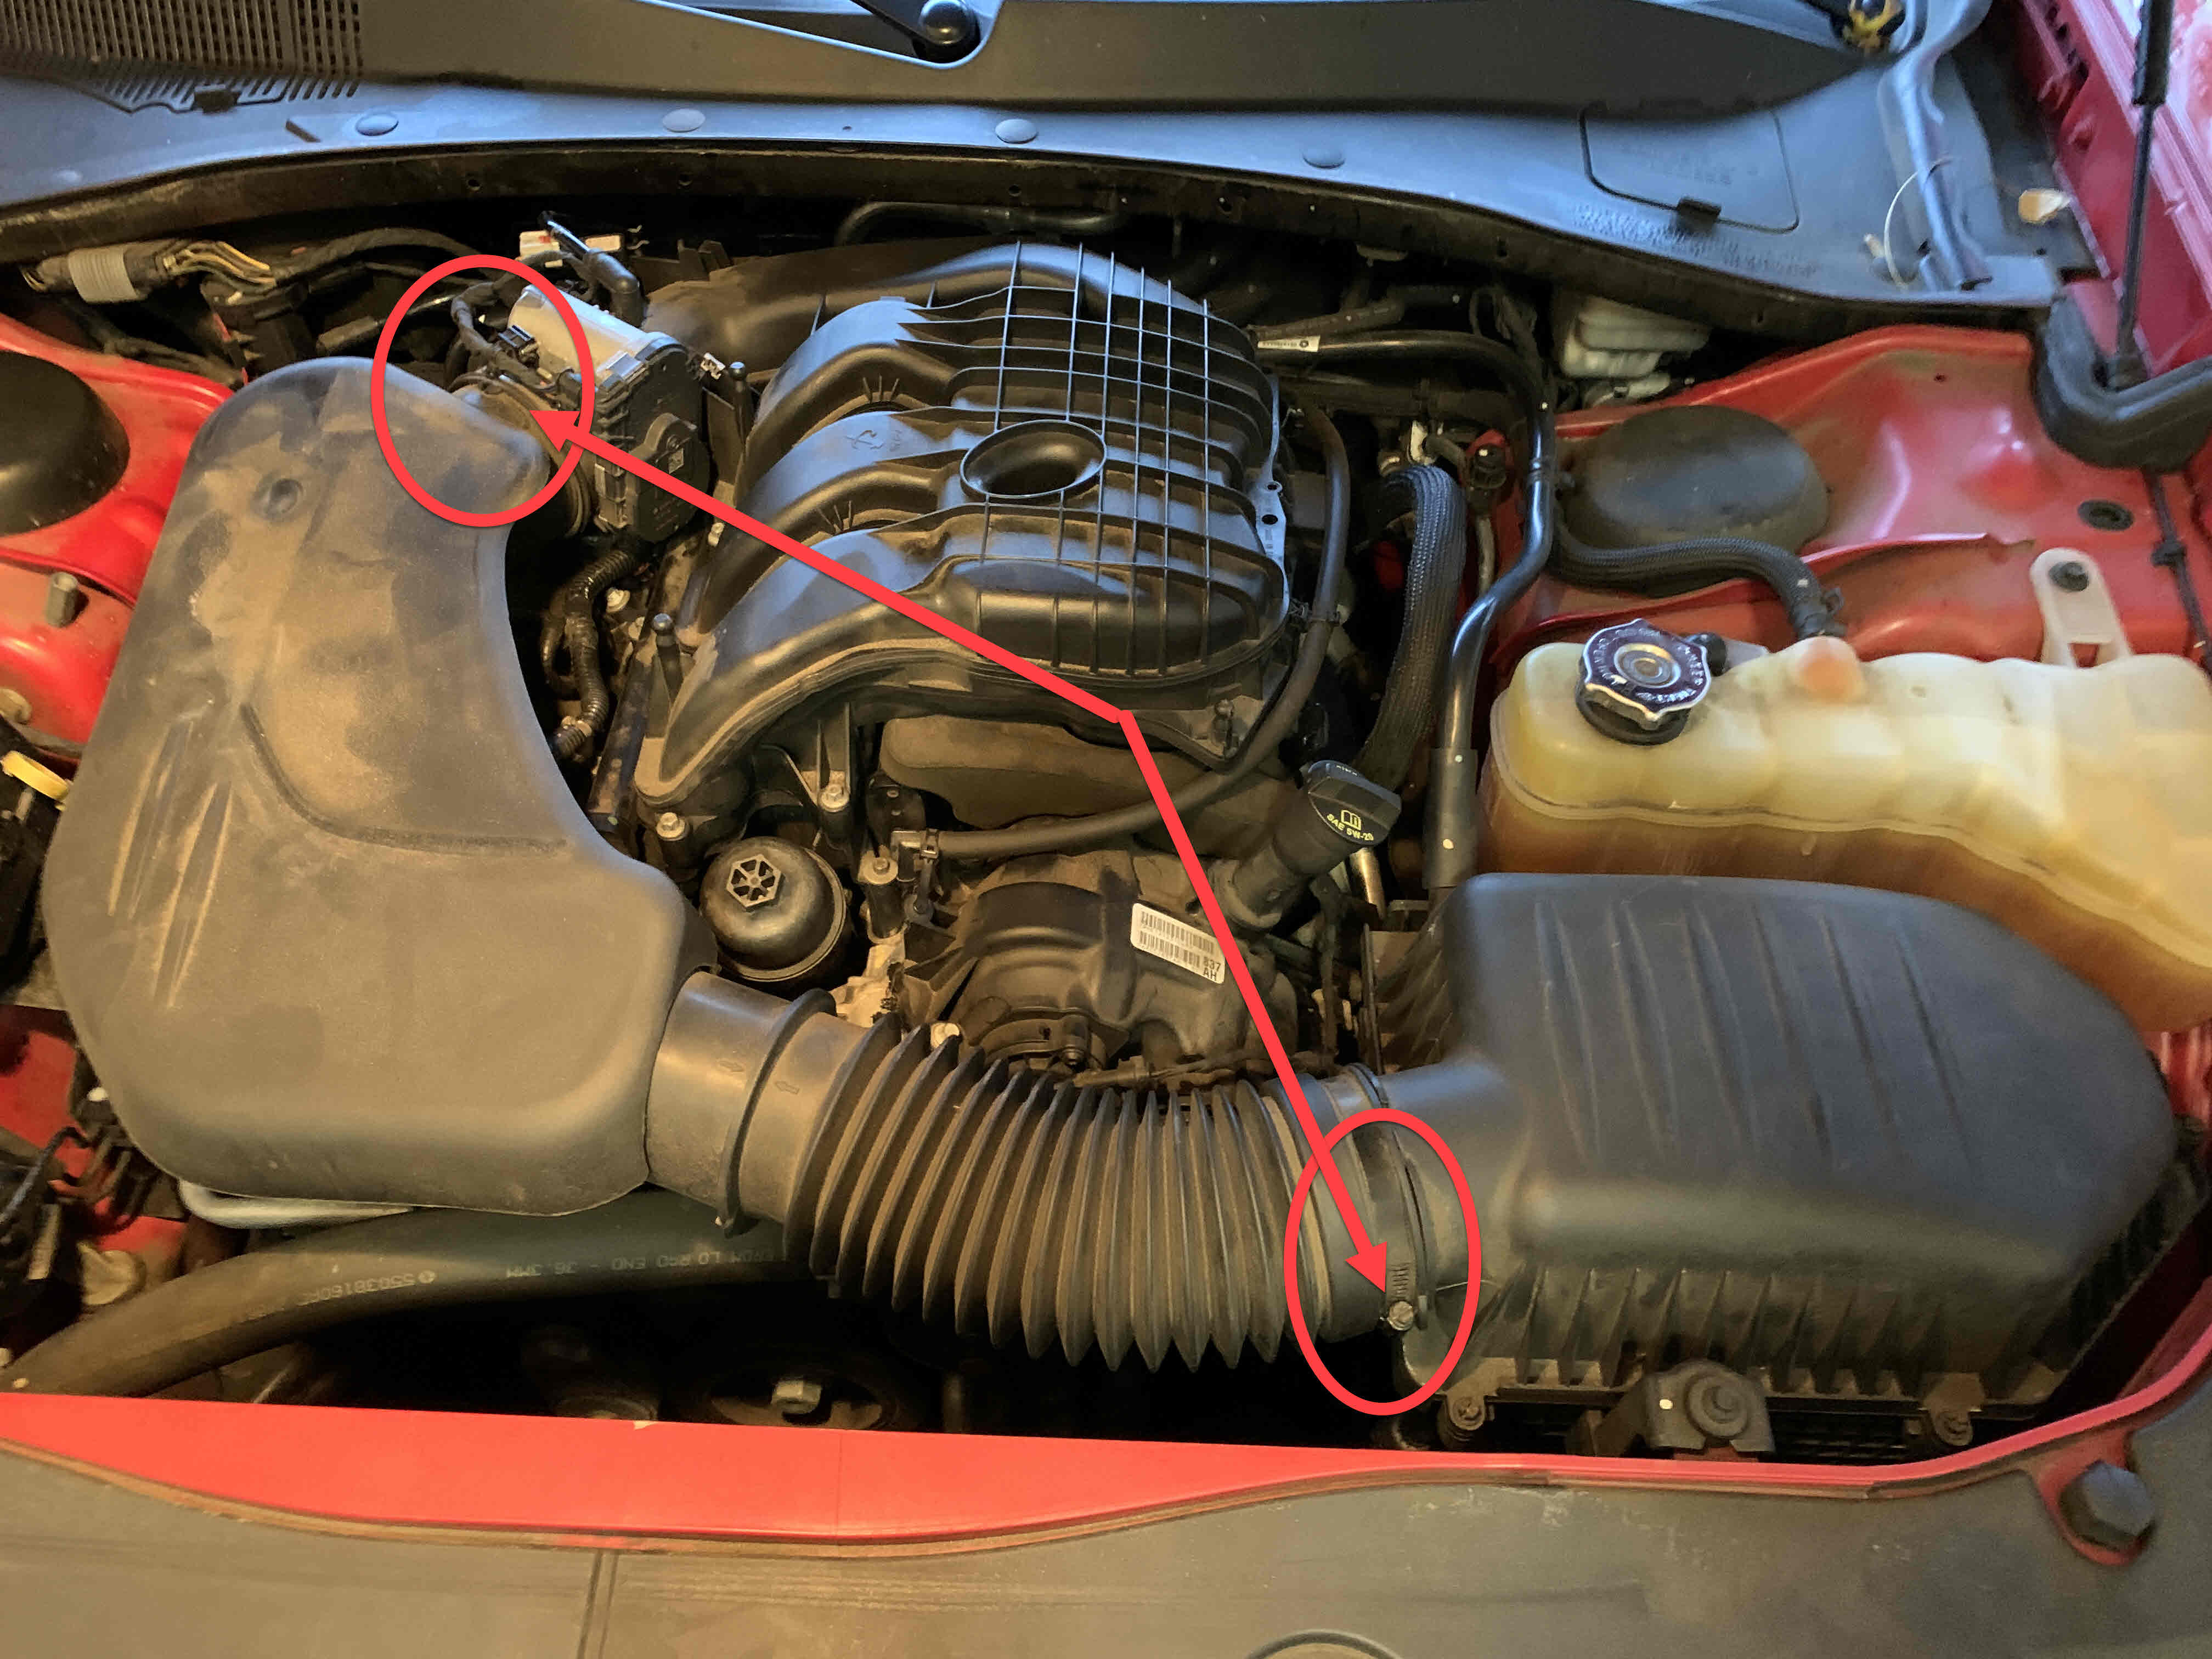 2014 - Dodge Charger - How To Fix P0128 Error Code